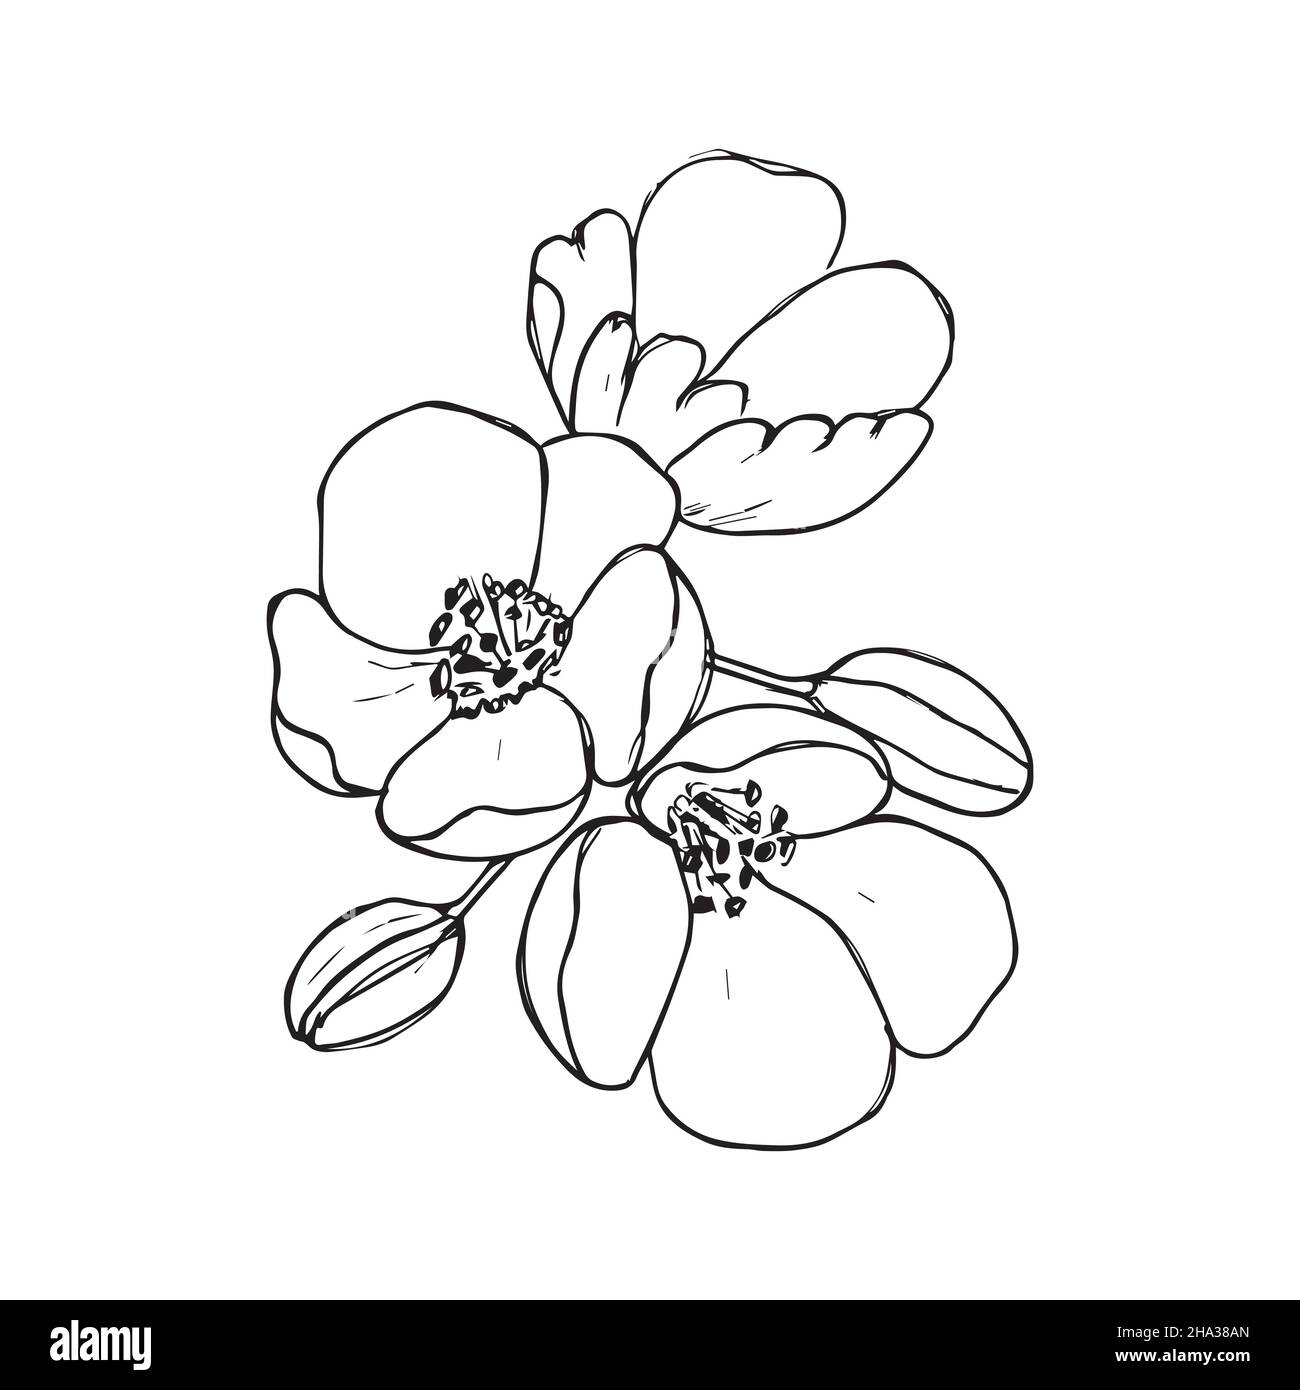 250 Apple Blossom Tattoos Stock Photos Pictures  RoyaltyFree Images   iStock